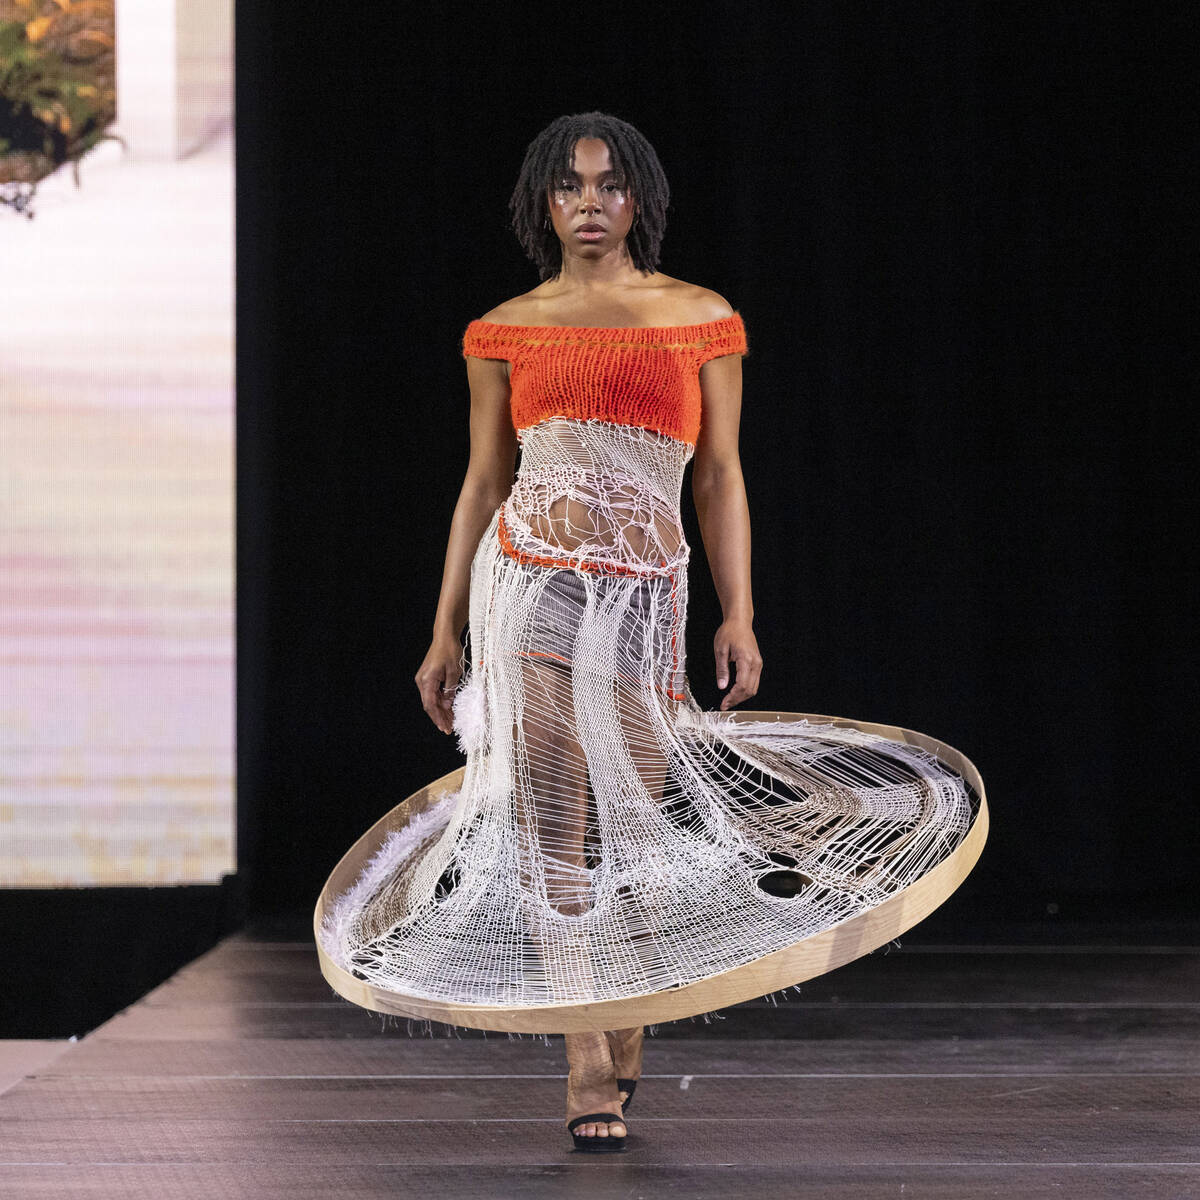 Model wearing orange knit top and distressed white knit hoop skirt.